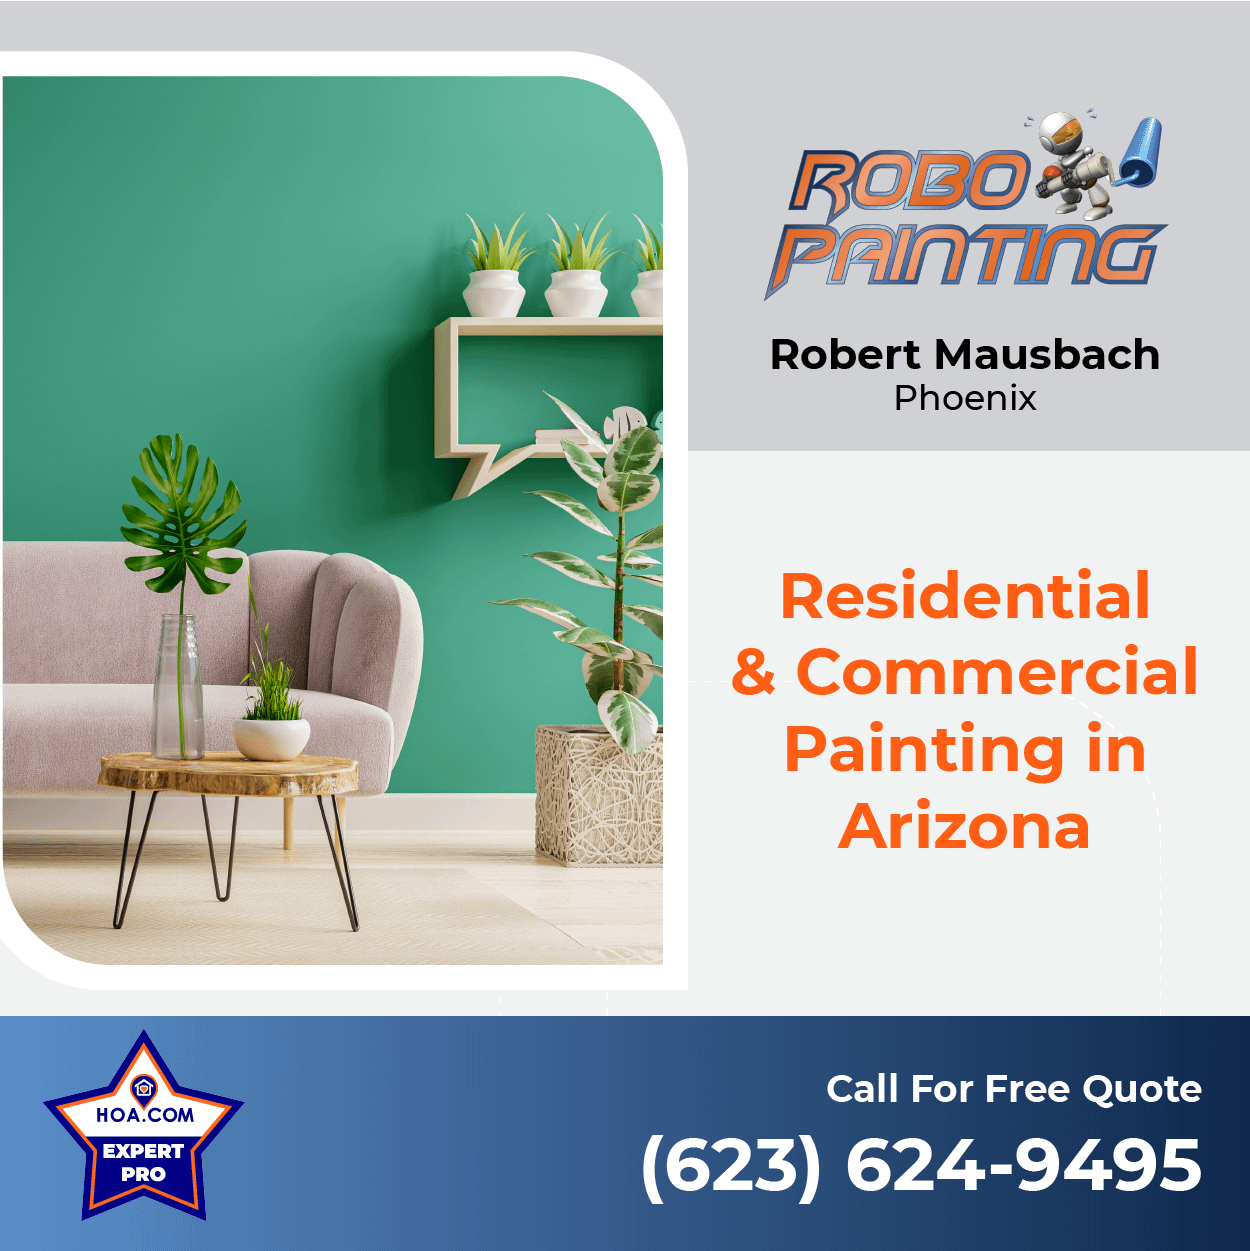 Robo Painting Residential & Commercial Painting In Arizona